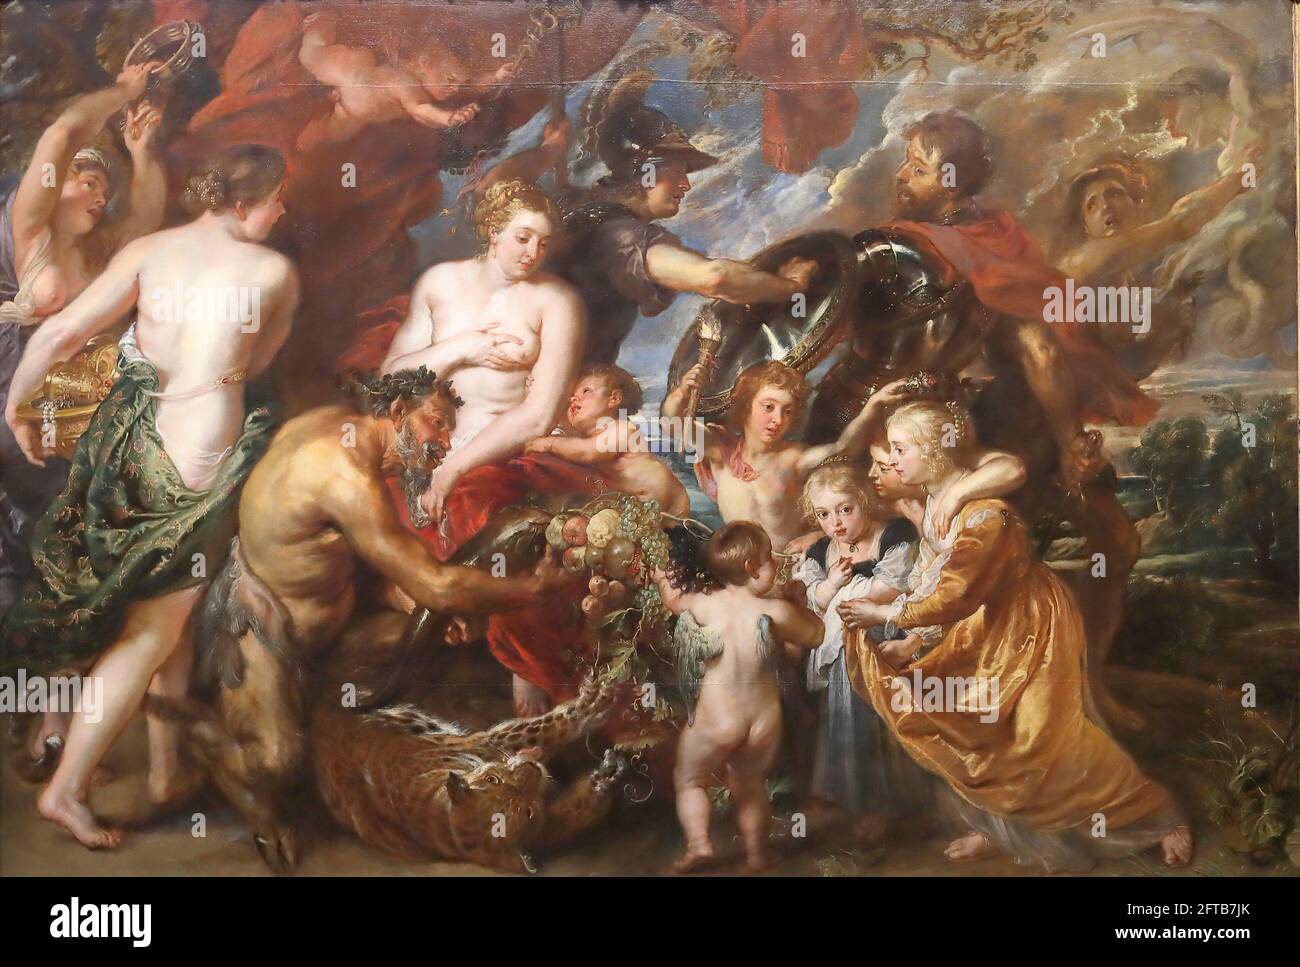 Minerva protects Pax from Mars (Peace and War) by Flemish Baroque painter Peter Paul Rubens at the National Gallery, London, UK Stock Photo